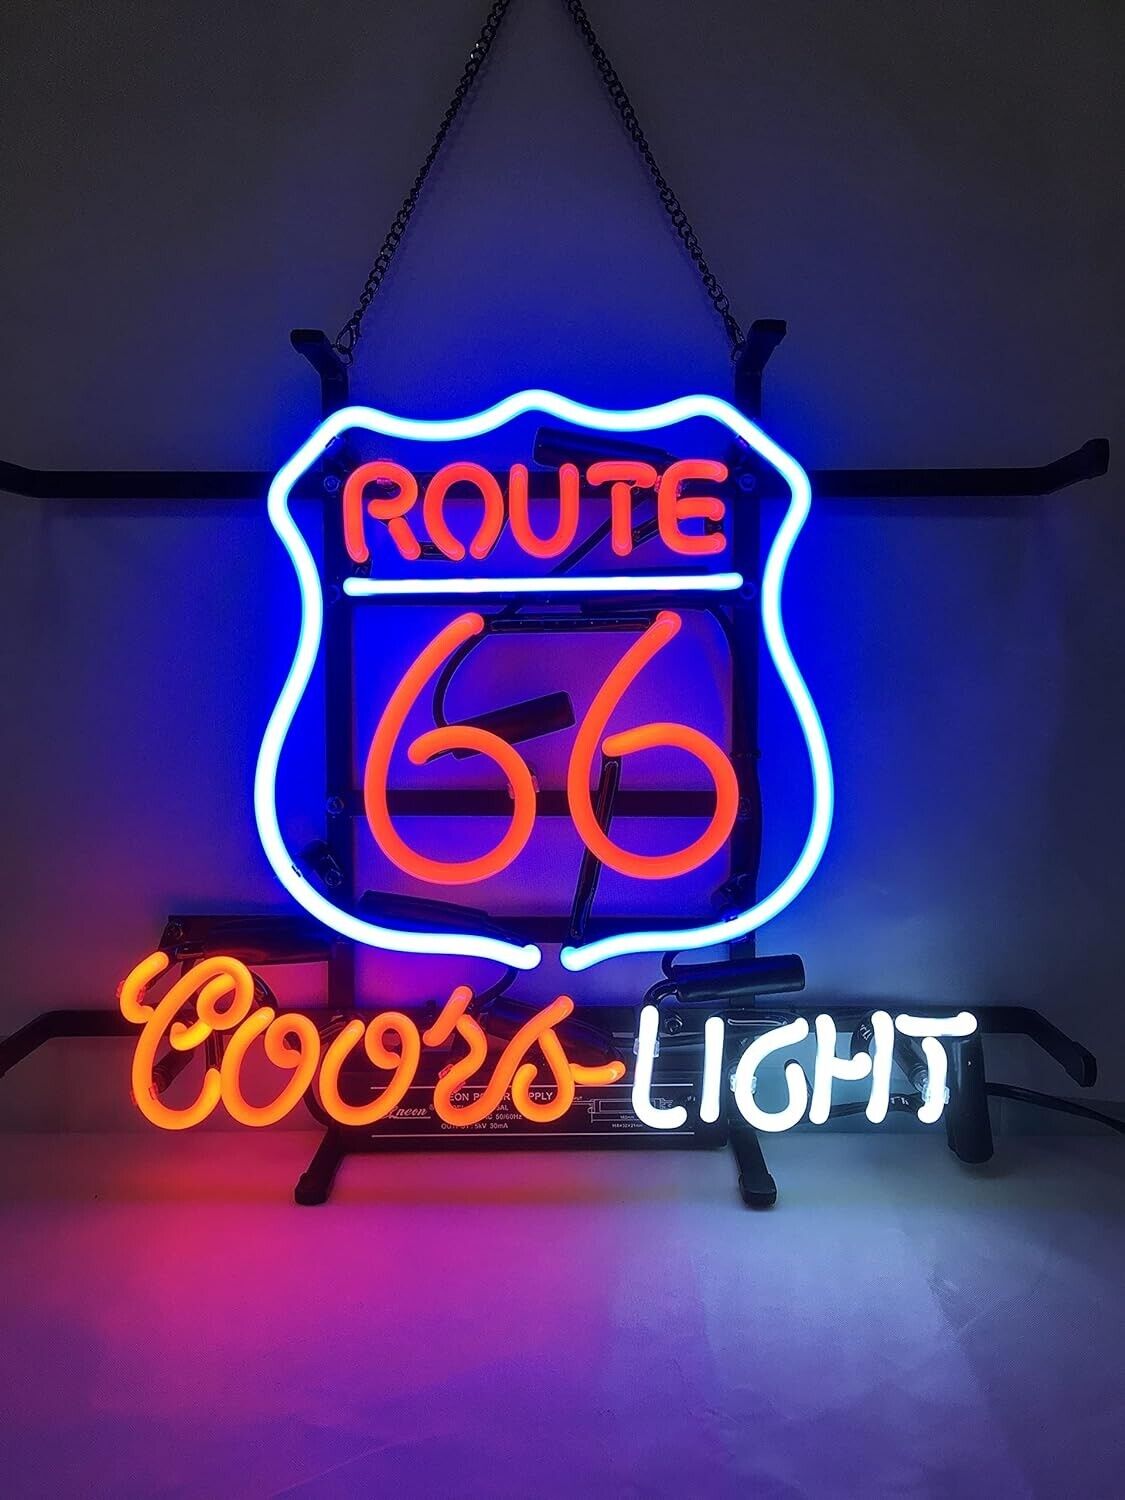 ROUTE 66 COORS LIGHT NEON 